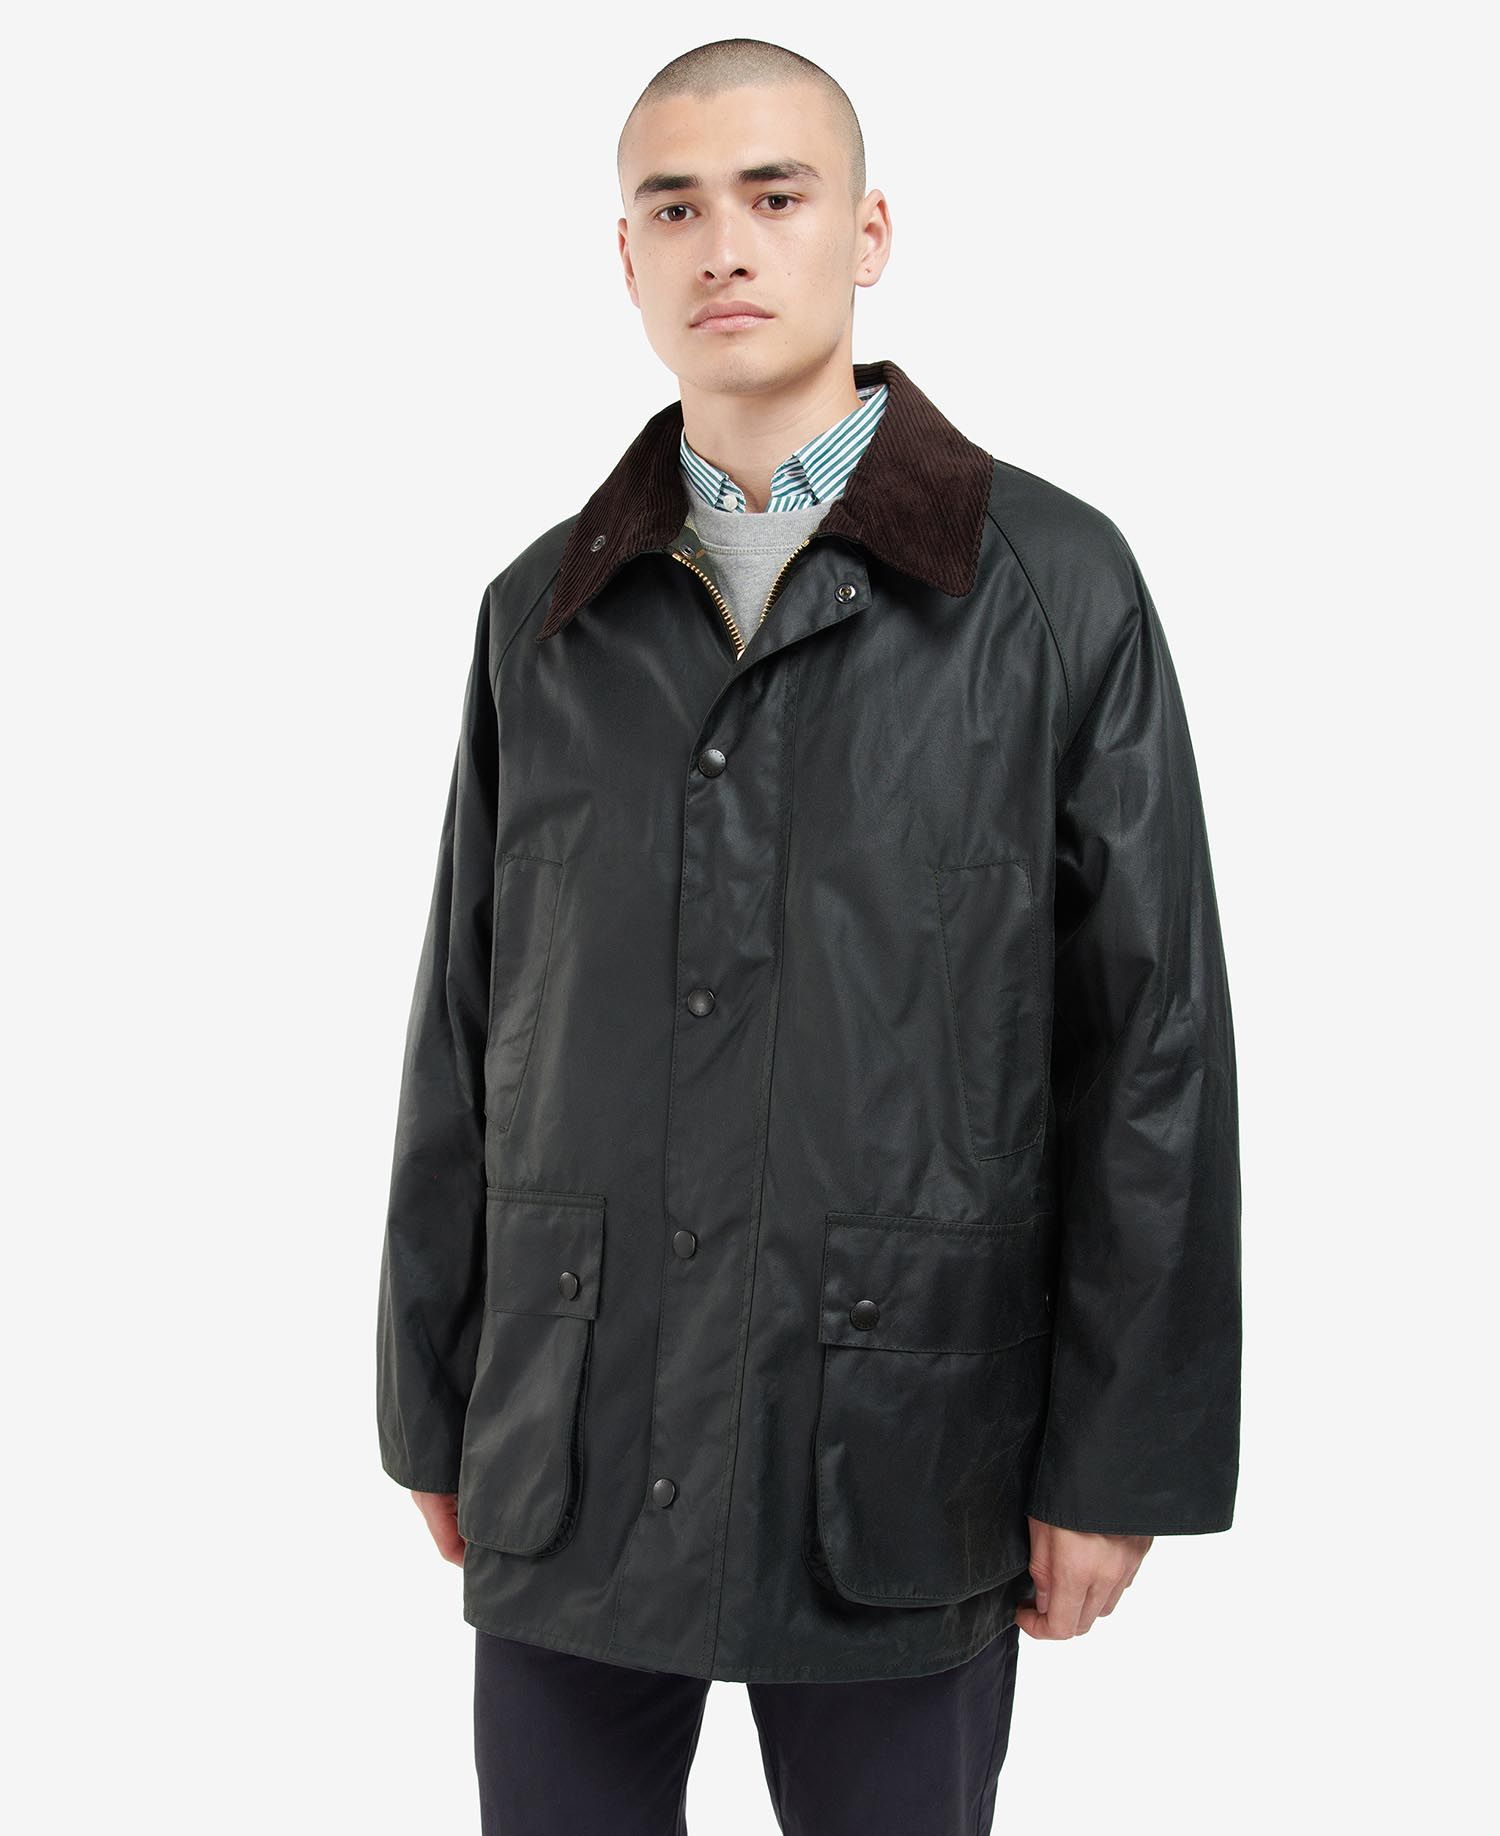 Shop the Barbour OS Bedale Wax Jacket in Green today. | Barbour